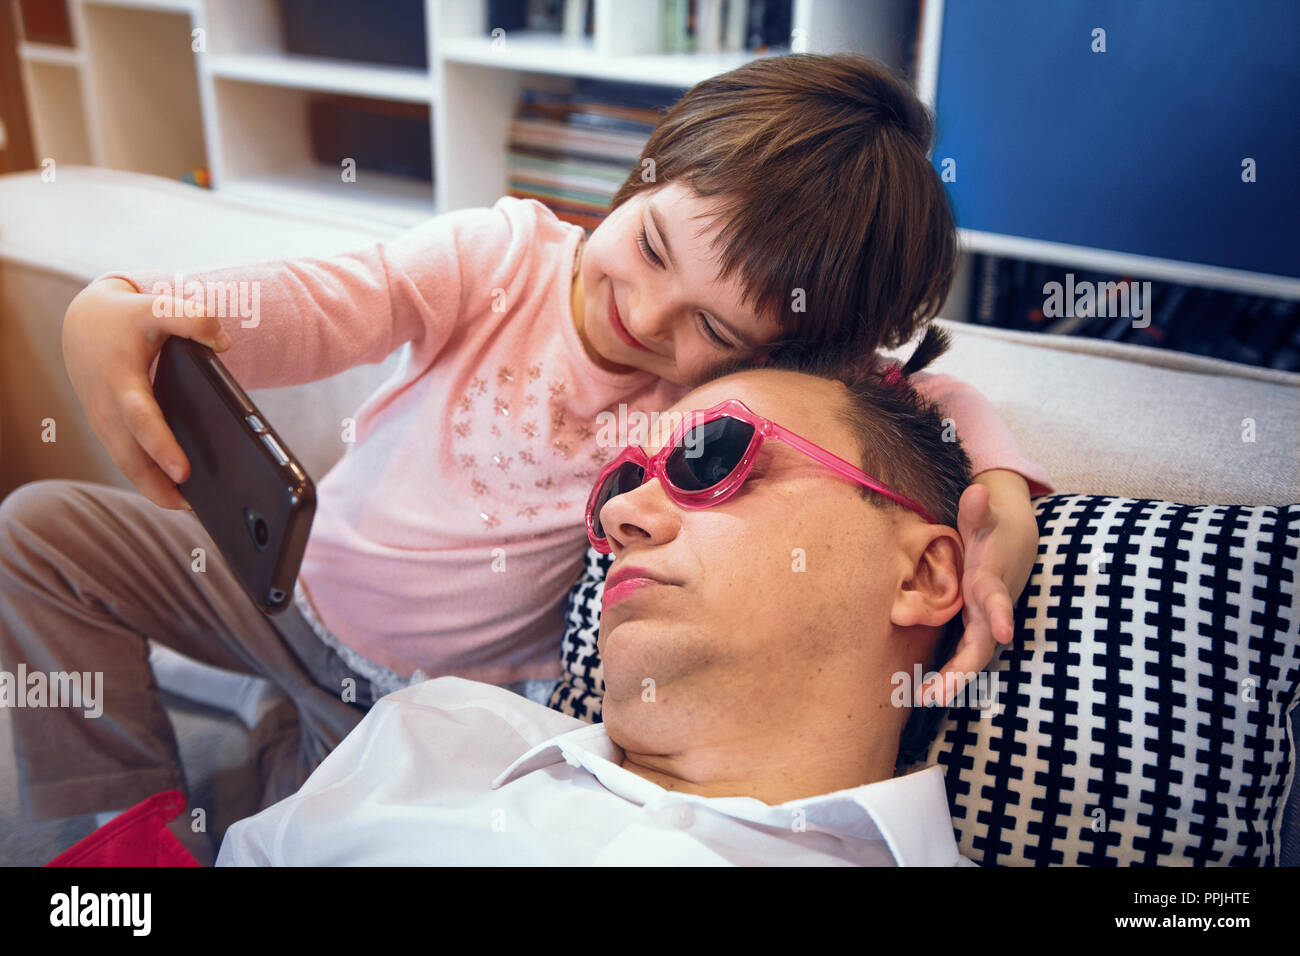 Little girl making selfie with her sleeping father Stock Photo